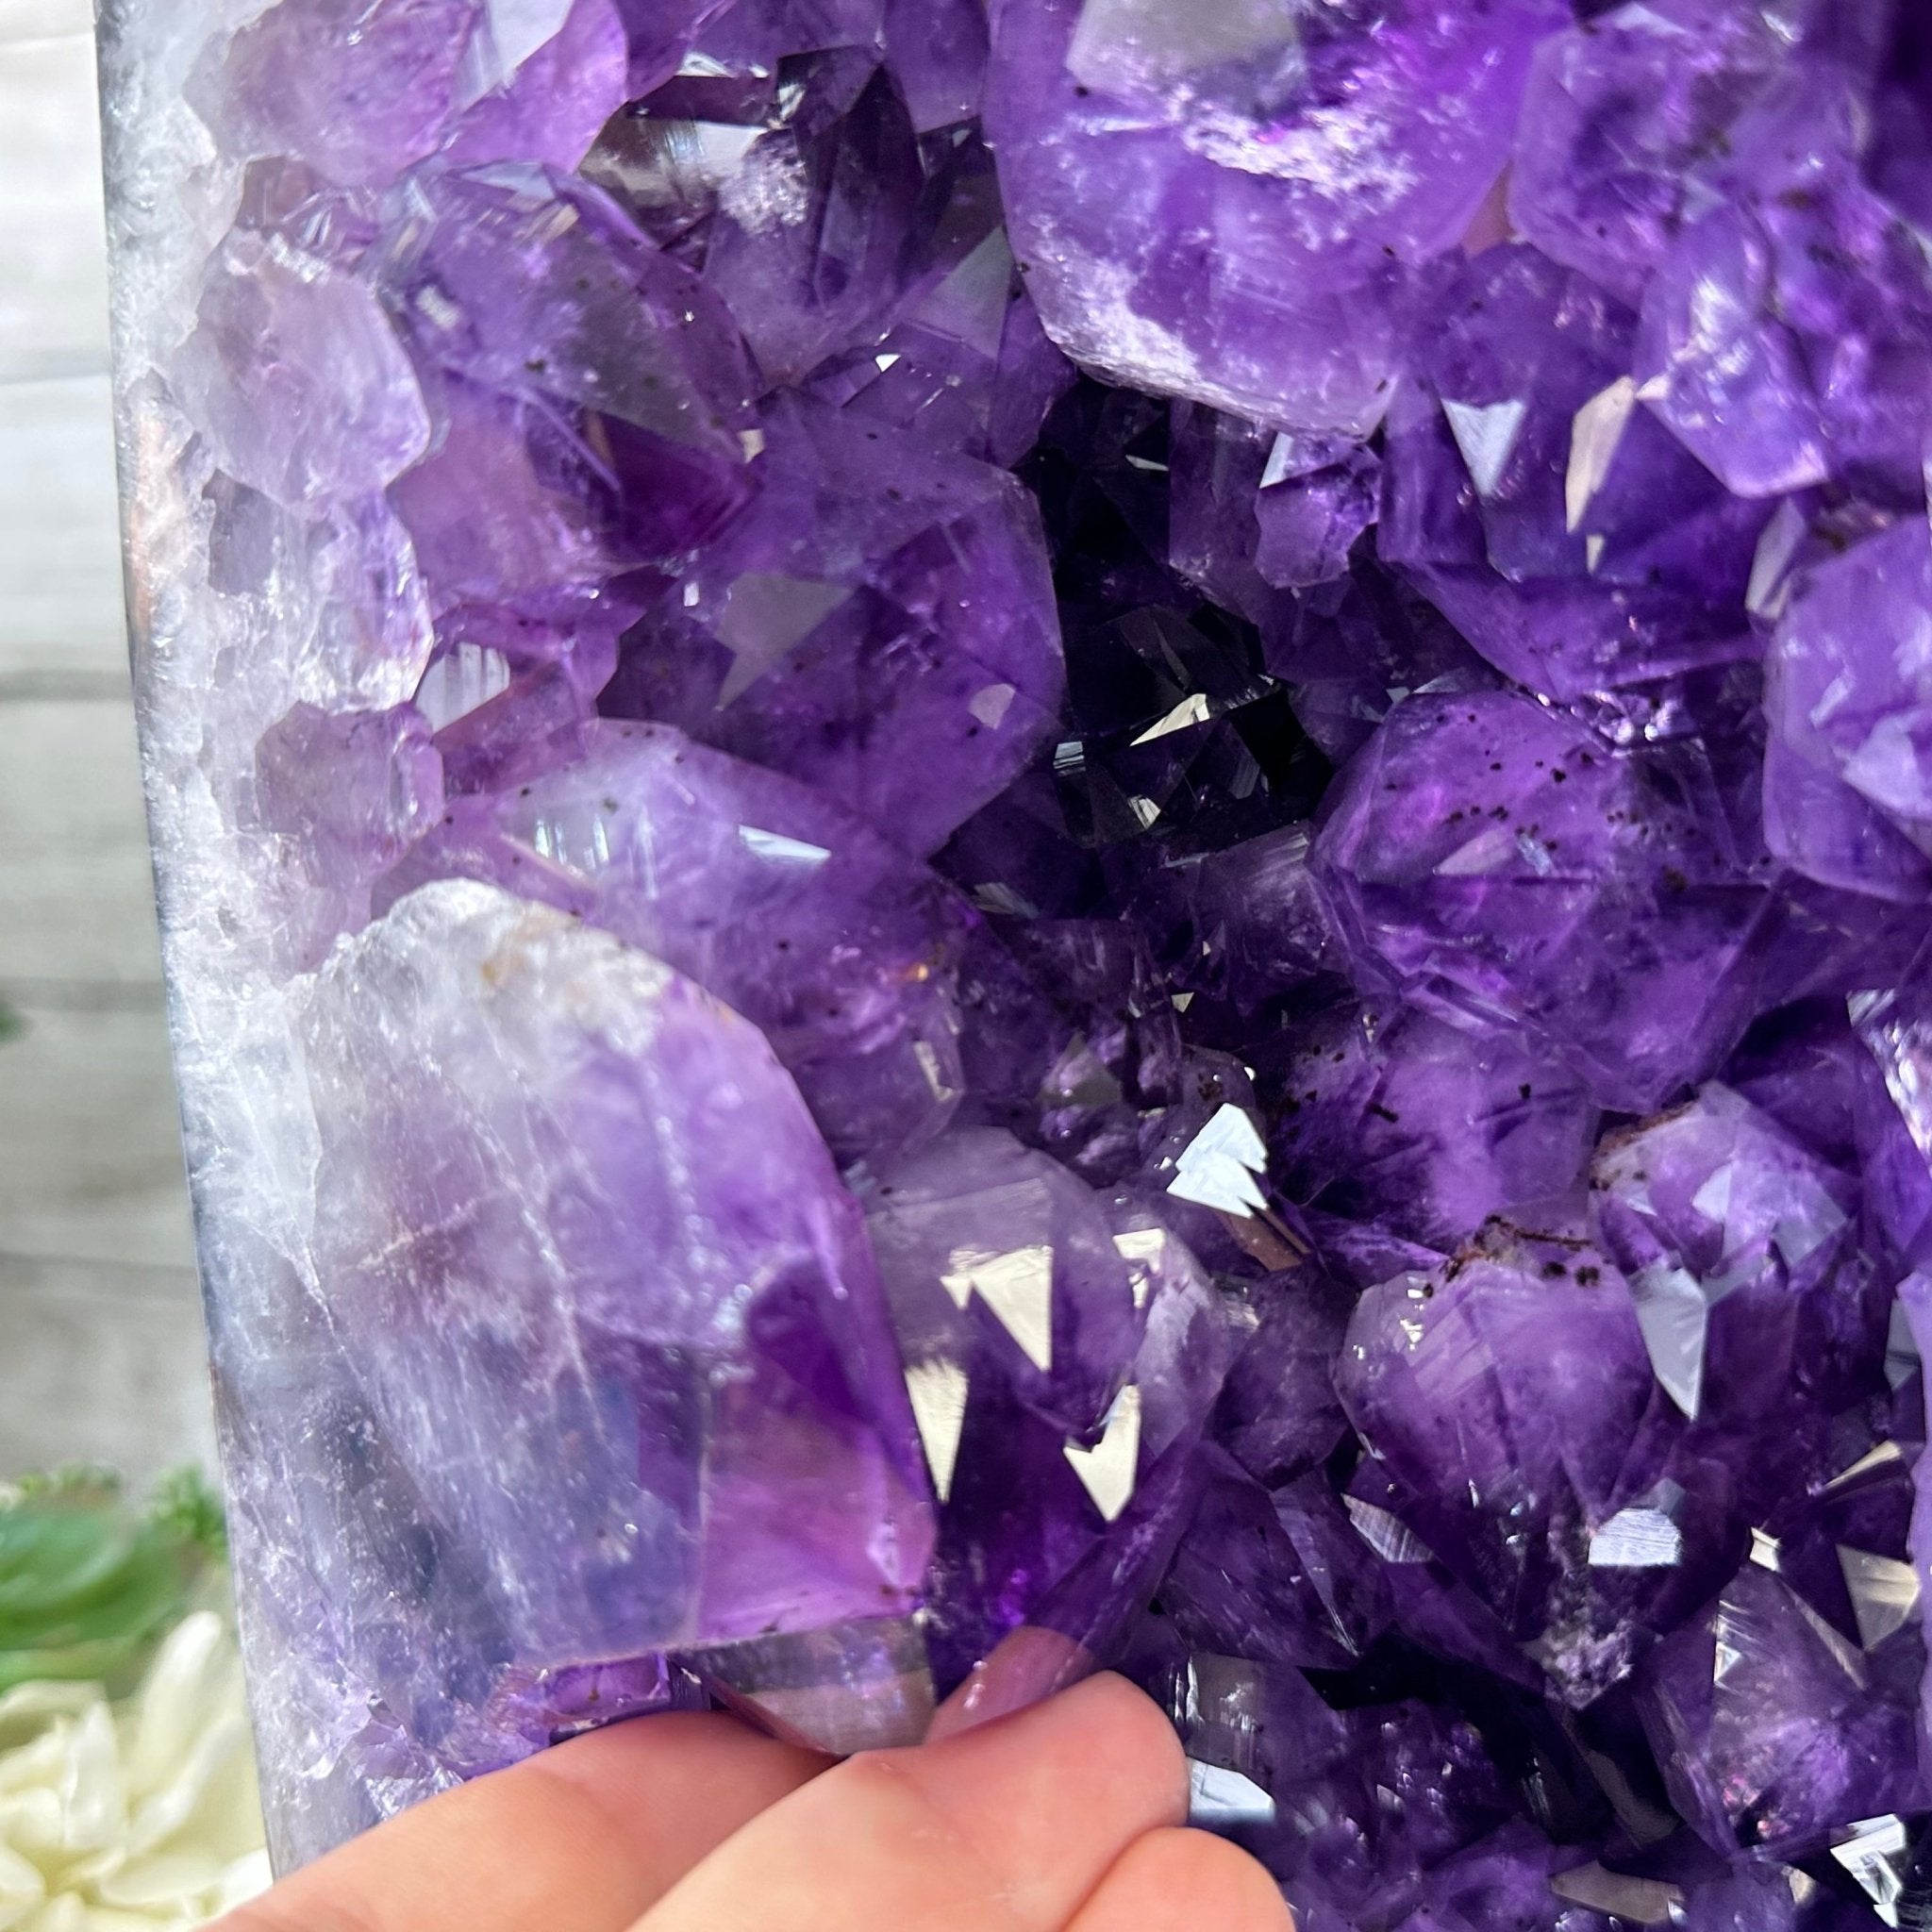 Super Quality Brazilian Amethyst Cathedral, 87.8 lbs & 27.6" Tall, Model #5601-0994 by Brazil Gems - Brazil GemsBrazil GemsSuper Quality Brazilian Amethyst Cathedral, 87.8 lbs & 27.6" Tall, Model #5601-0994 by Brazil GemsCathedrals5601-0994